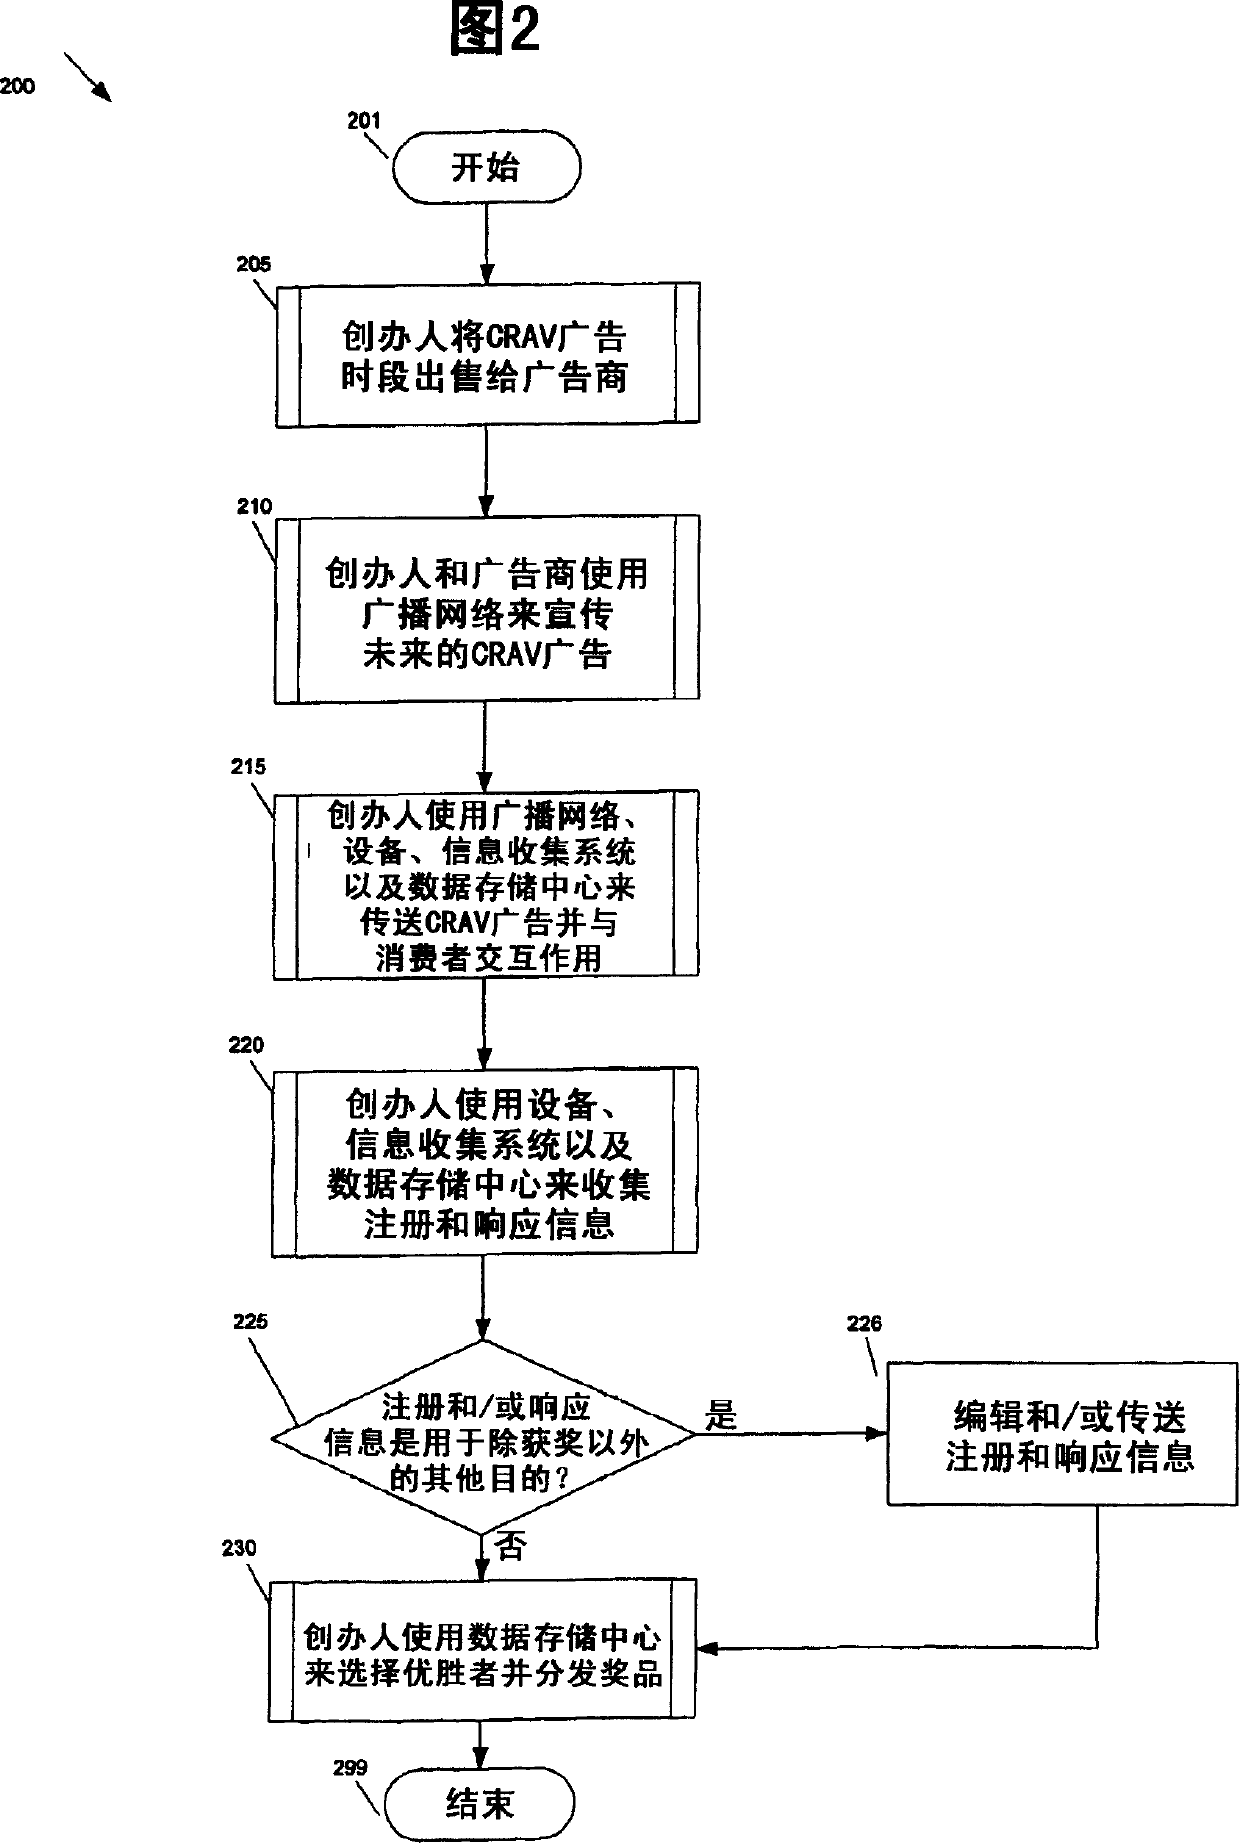 Method and system for communicating advertising and entertainment content and gathering consumer information